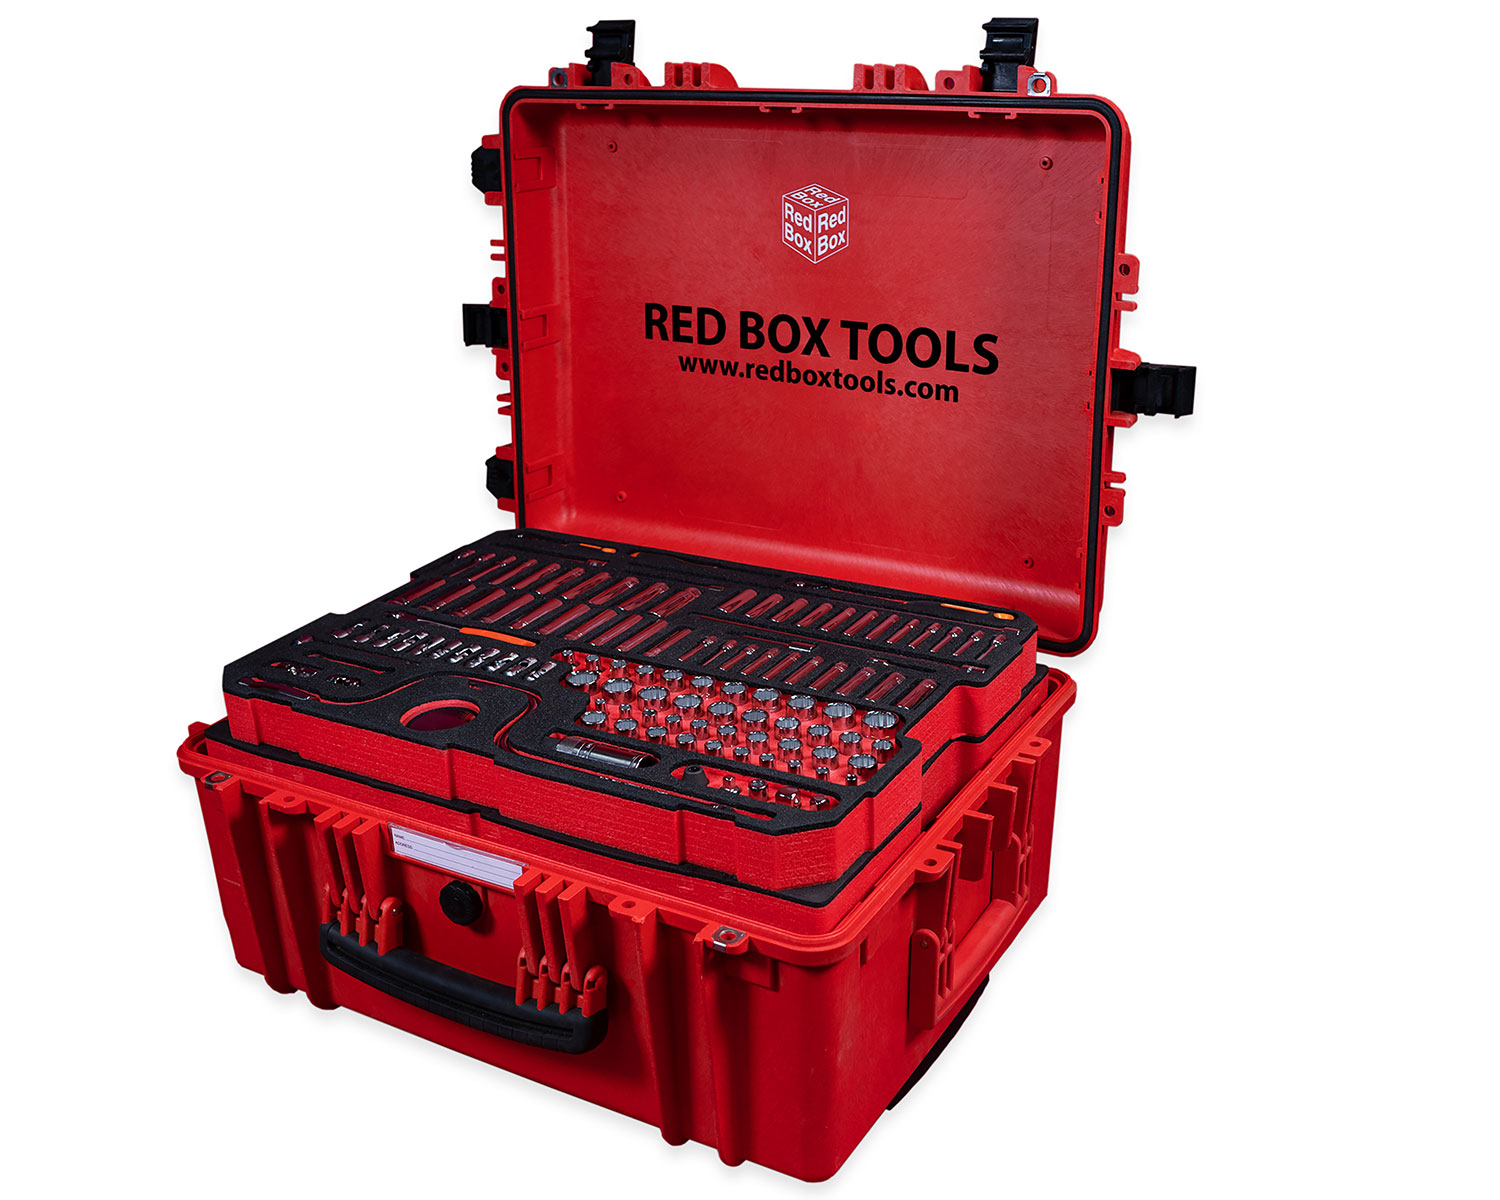 Helibox Trolley Case with Tools and spare foam - RBI8000ST® - Red Box Tools